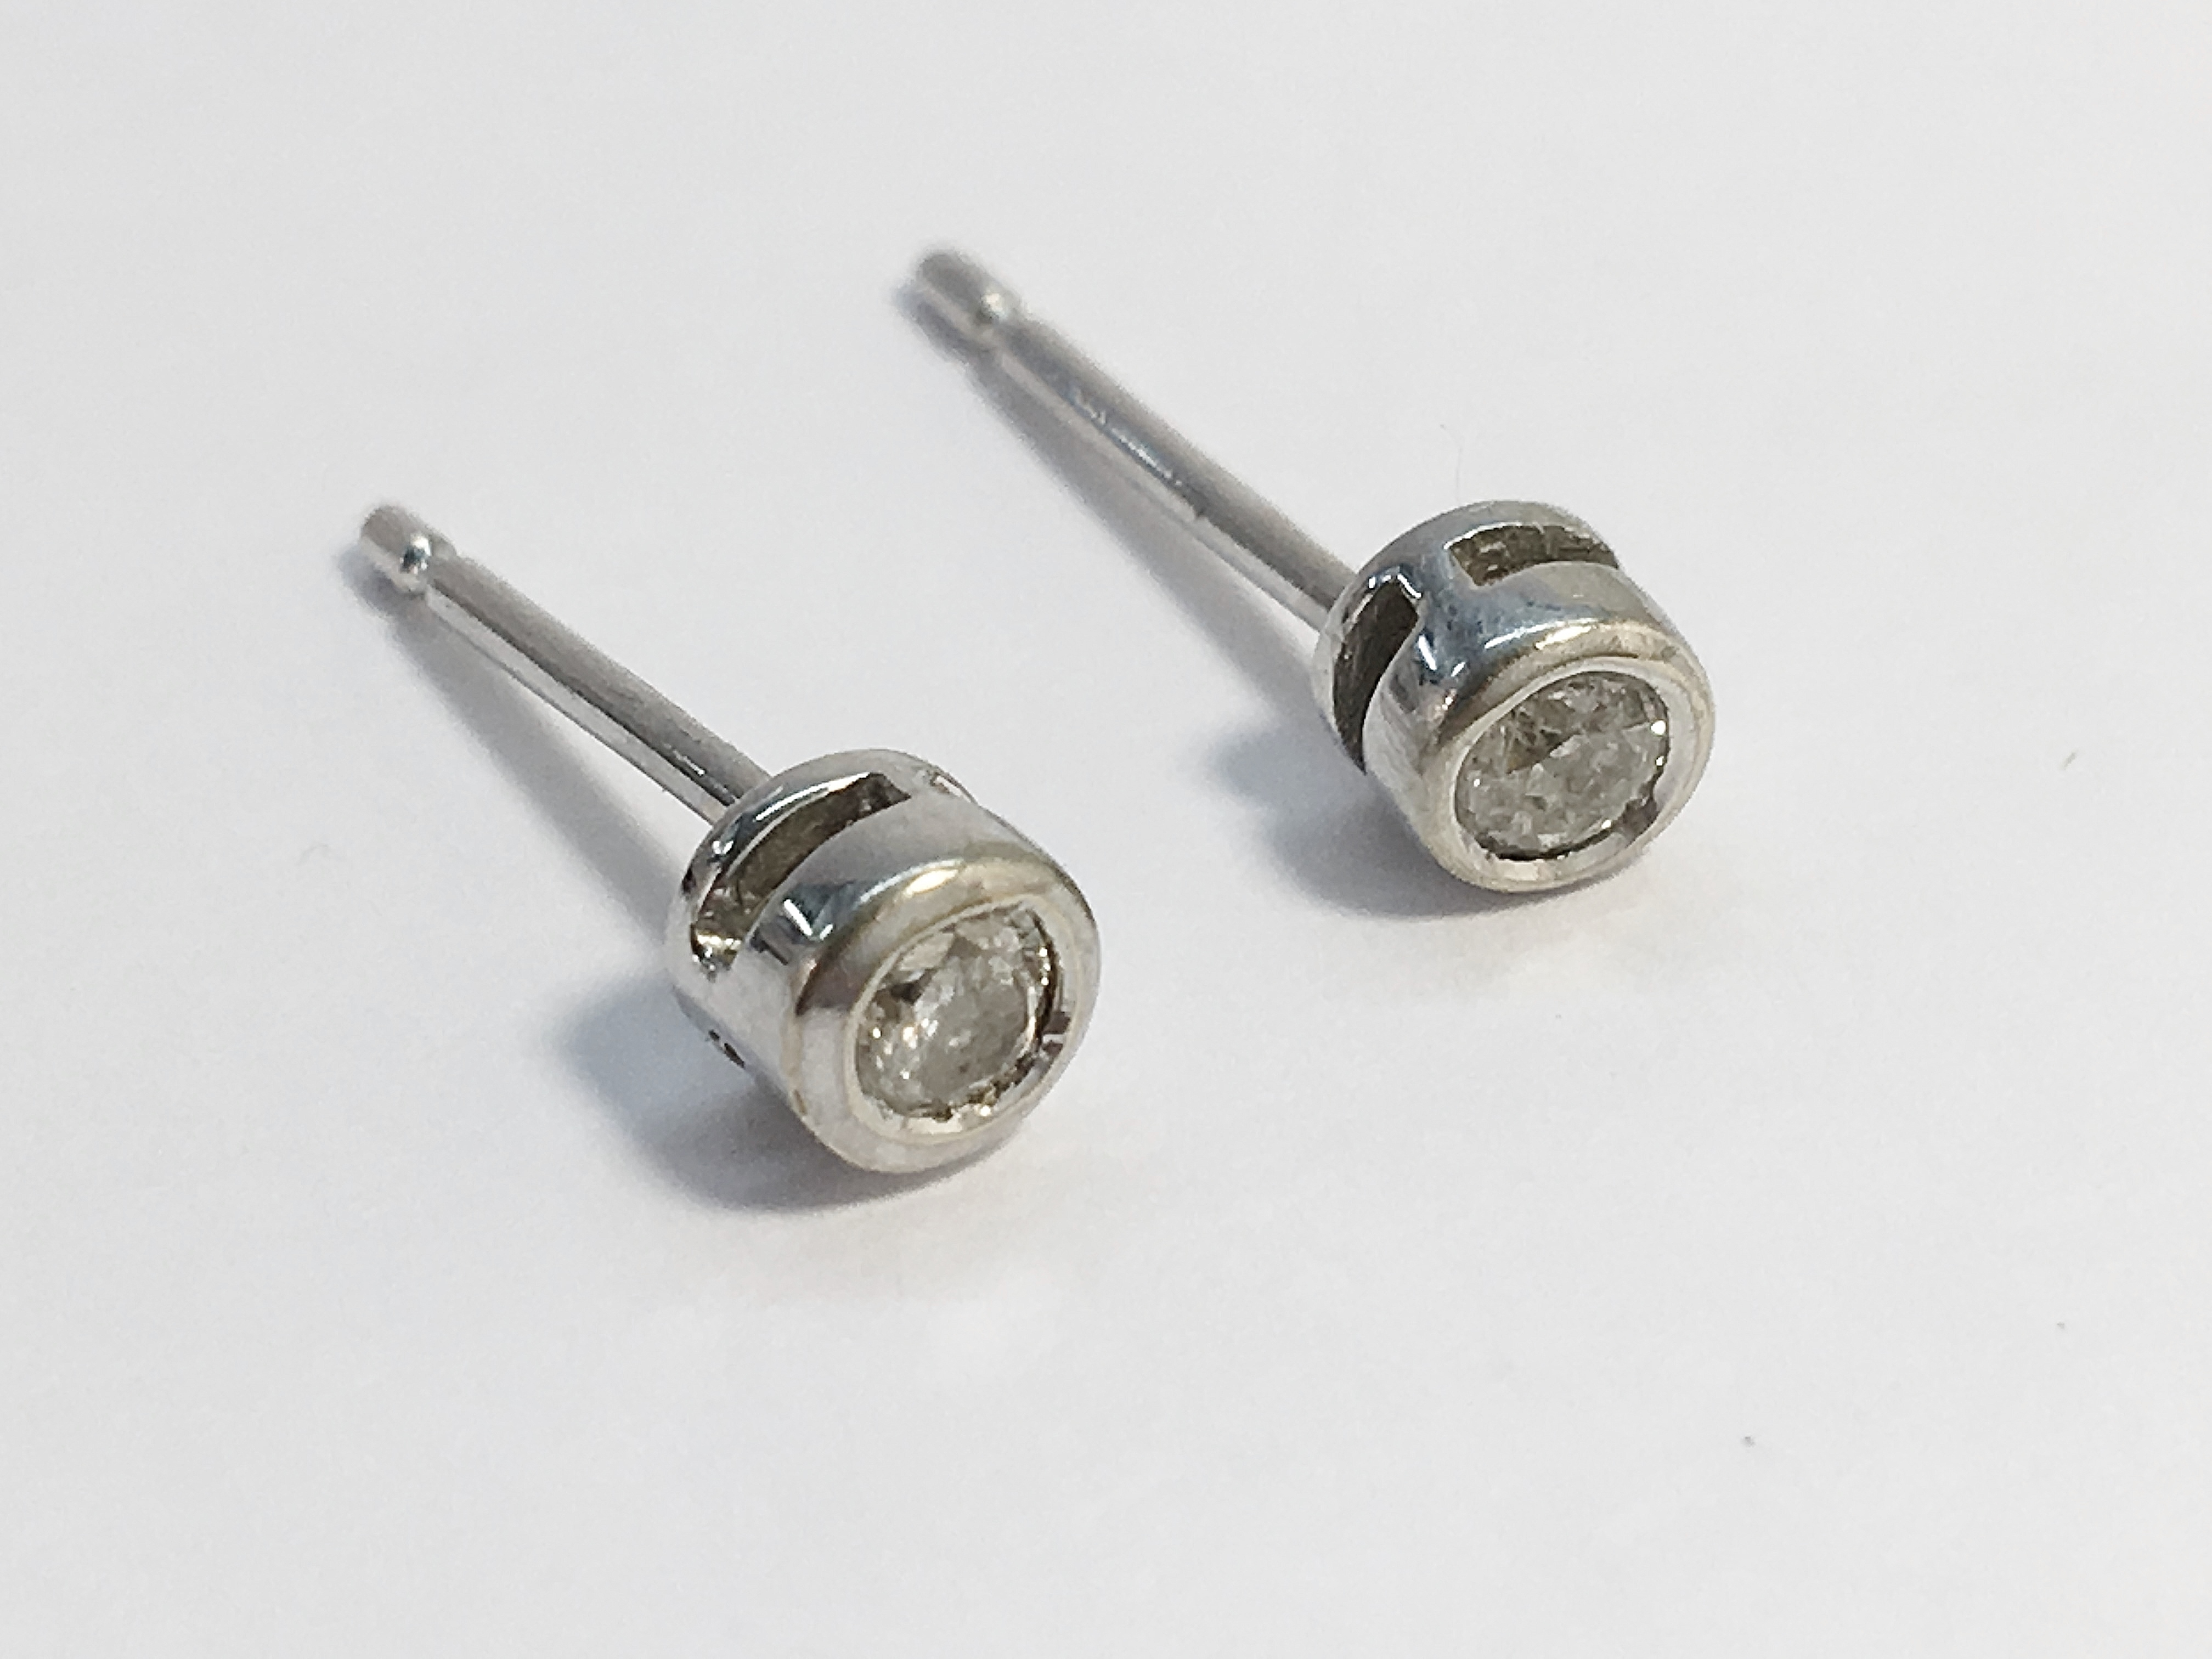 A pair of diamond solitaire earrings in 9ct white gold, the estimated total carat weight is 0.